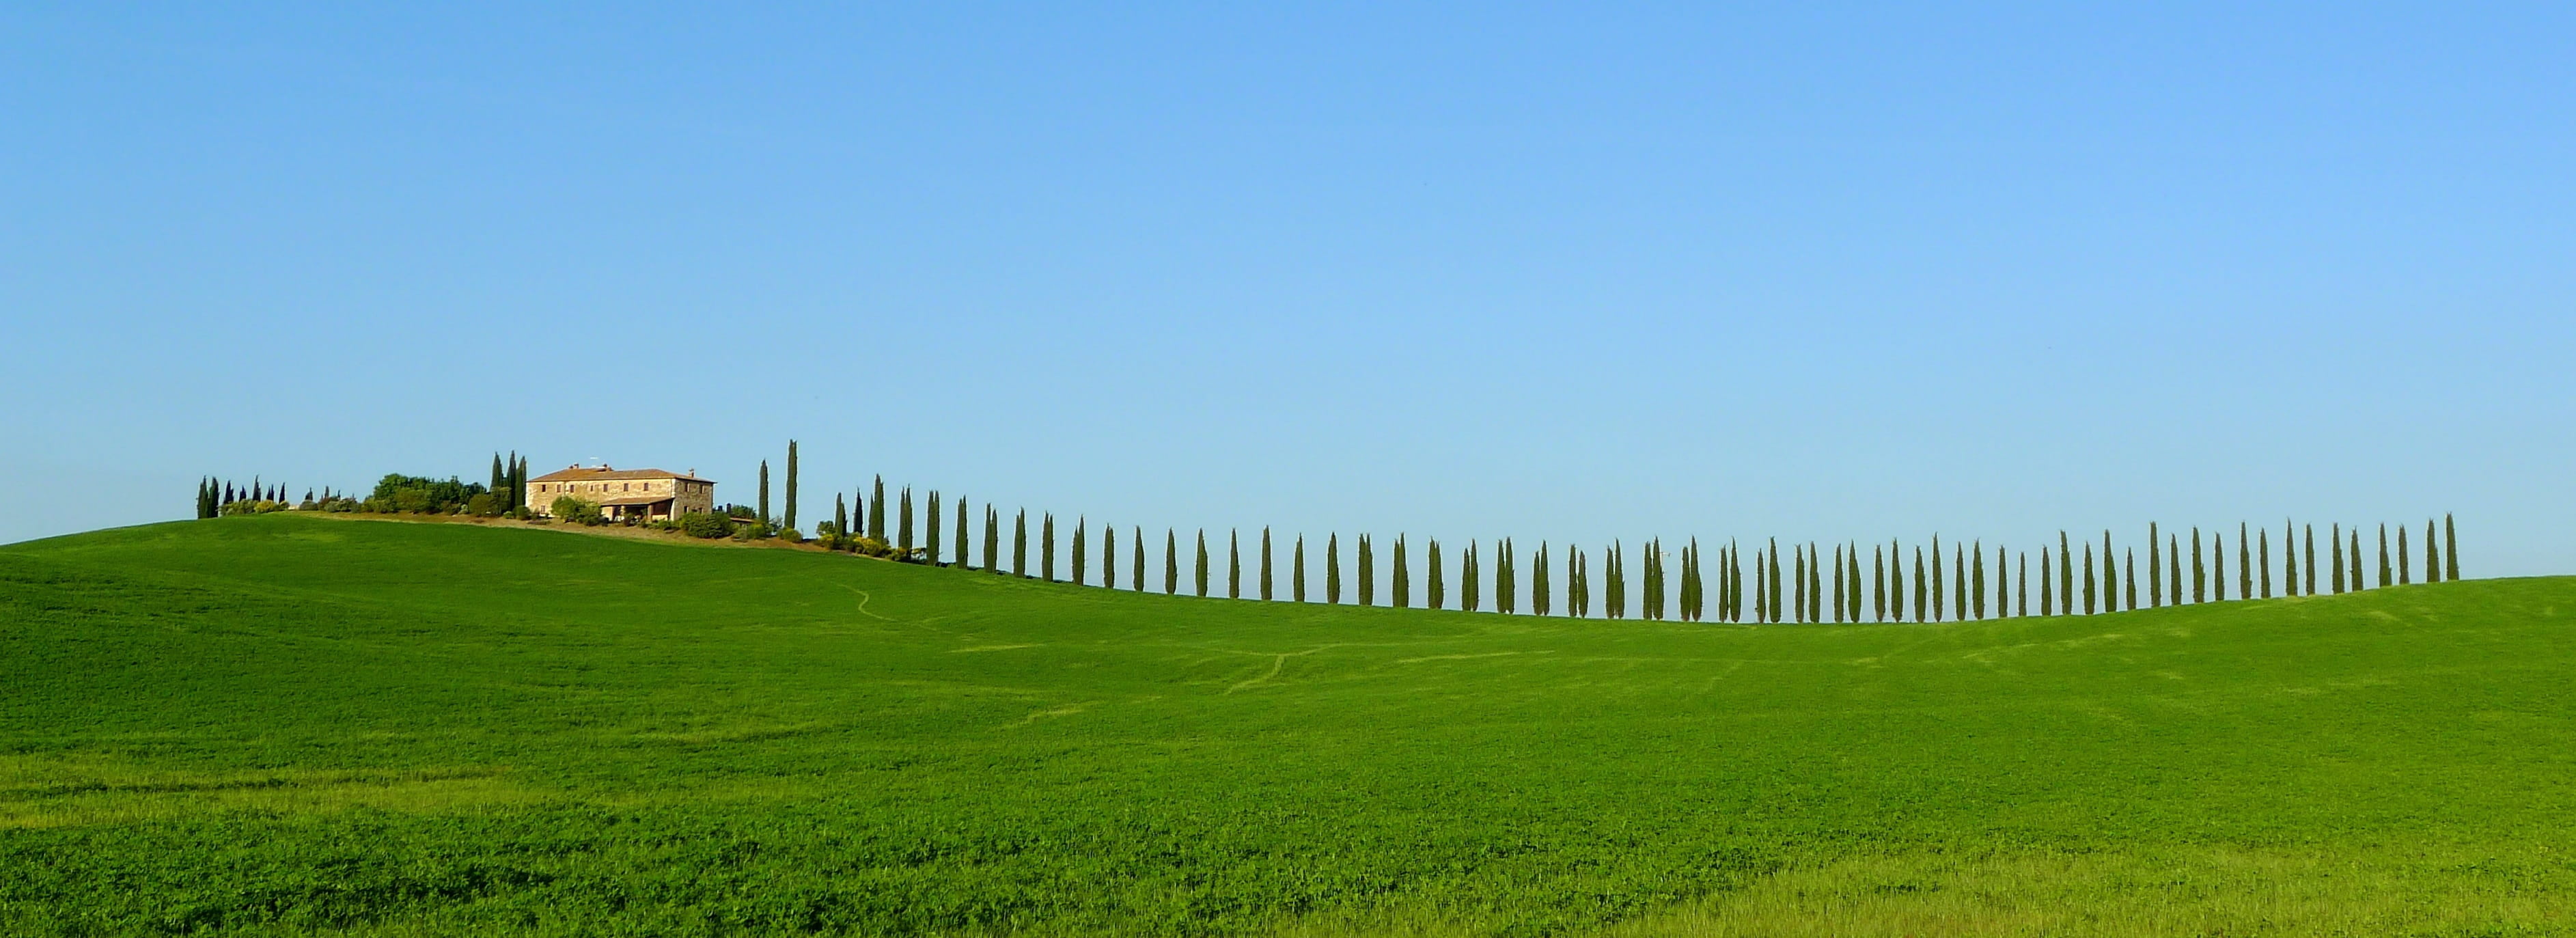 green grass field on hill at daytime, toscana, cypresses, farmhouse